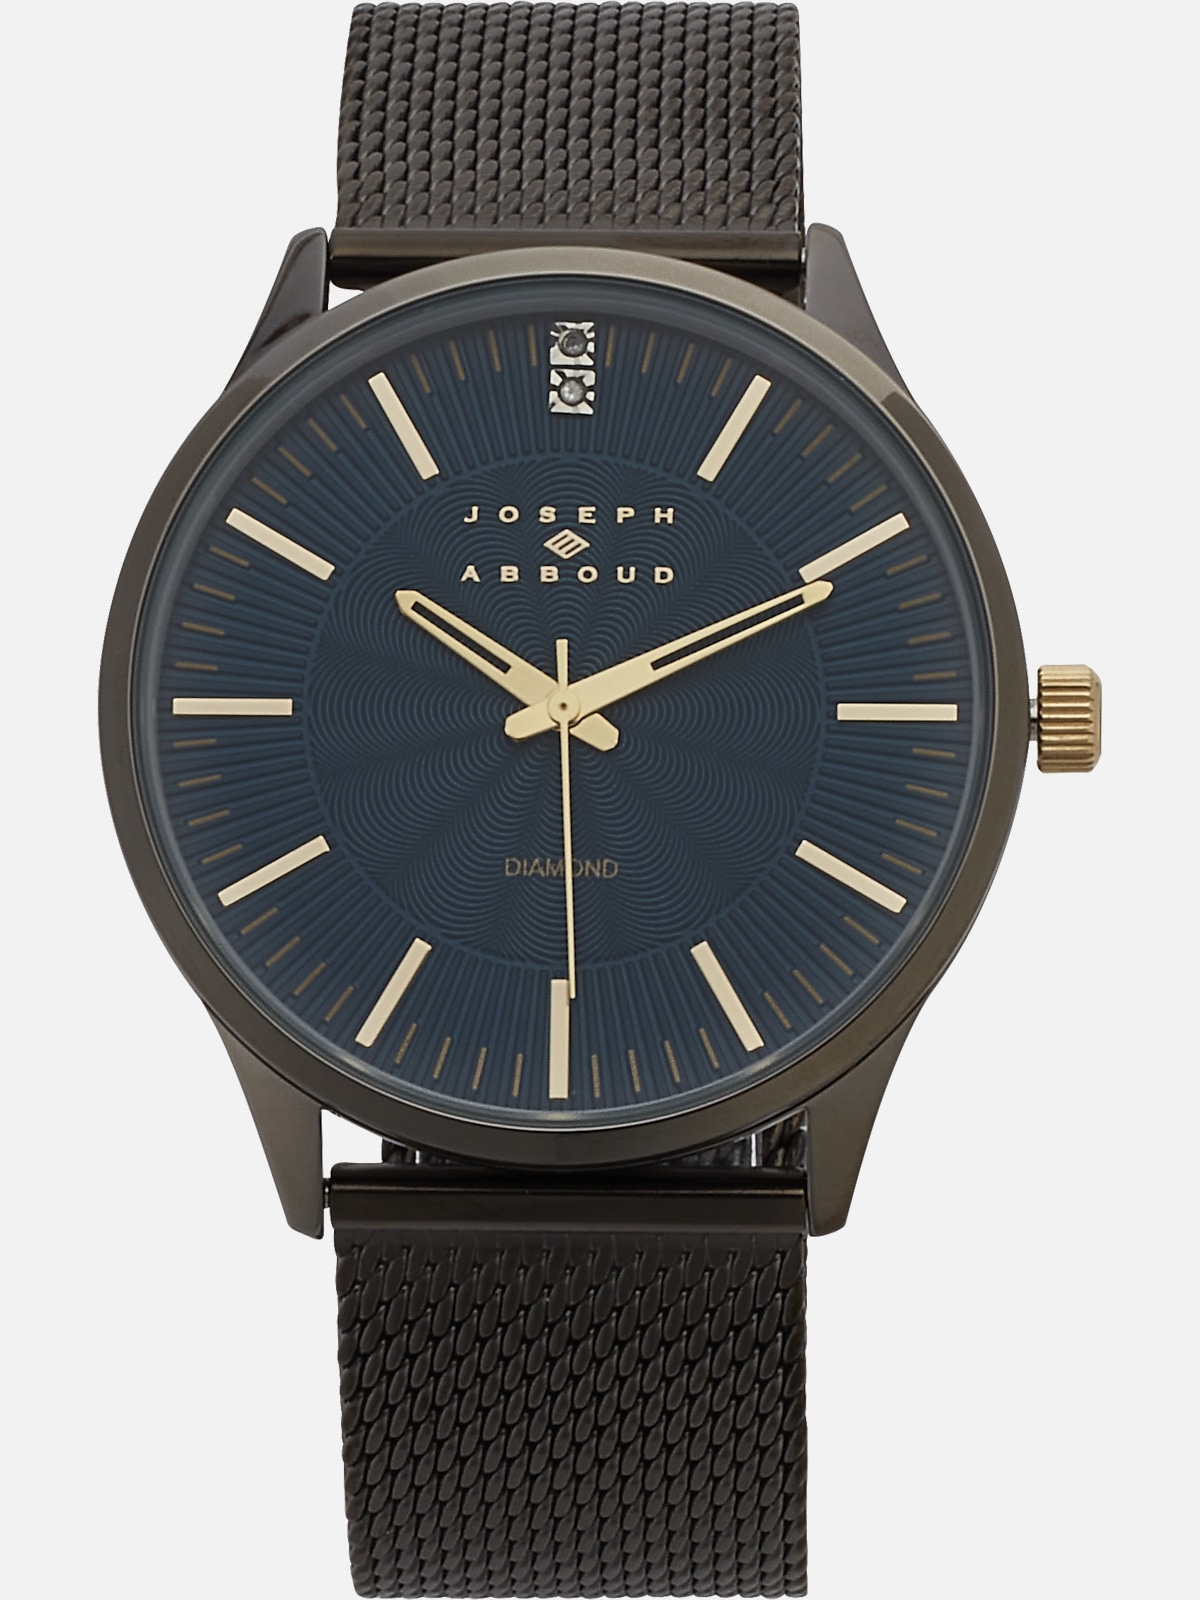 Joseph Abboud Grey Mesh Band Watch | All Clearance $39.99| Men's Wearhouse